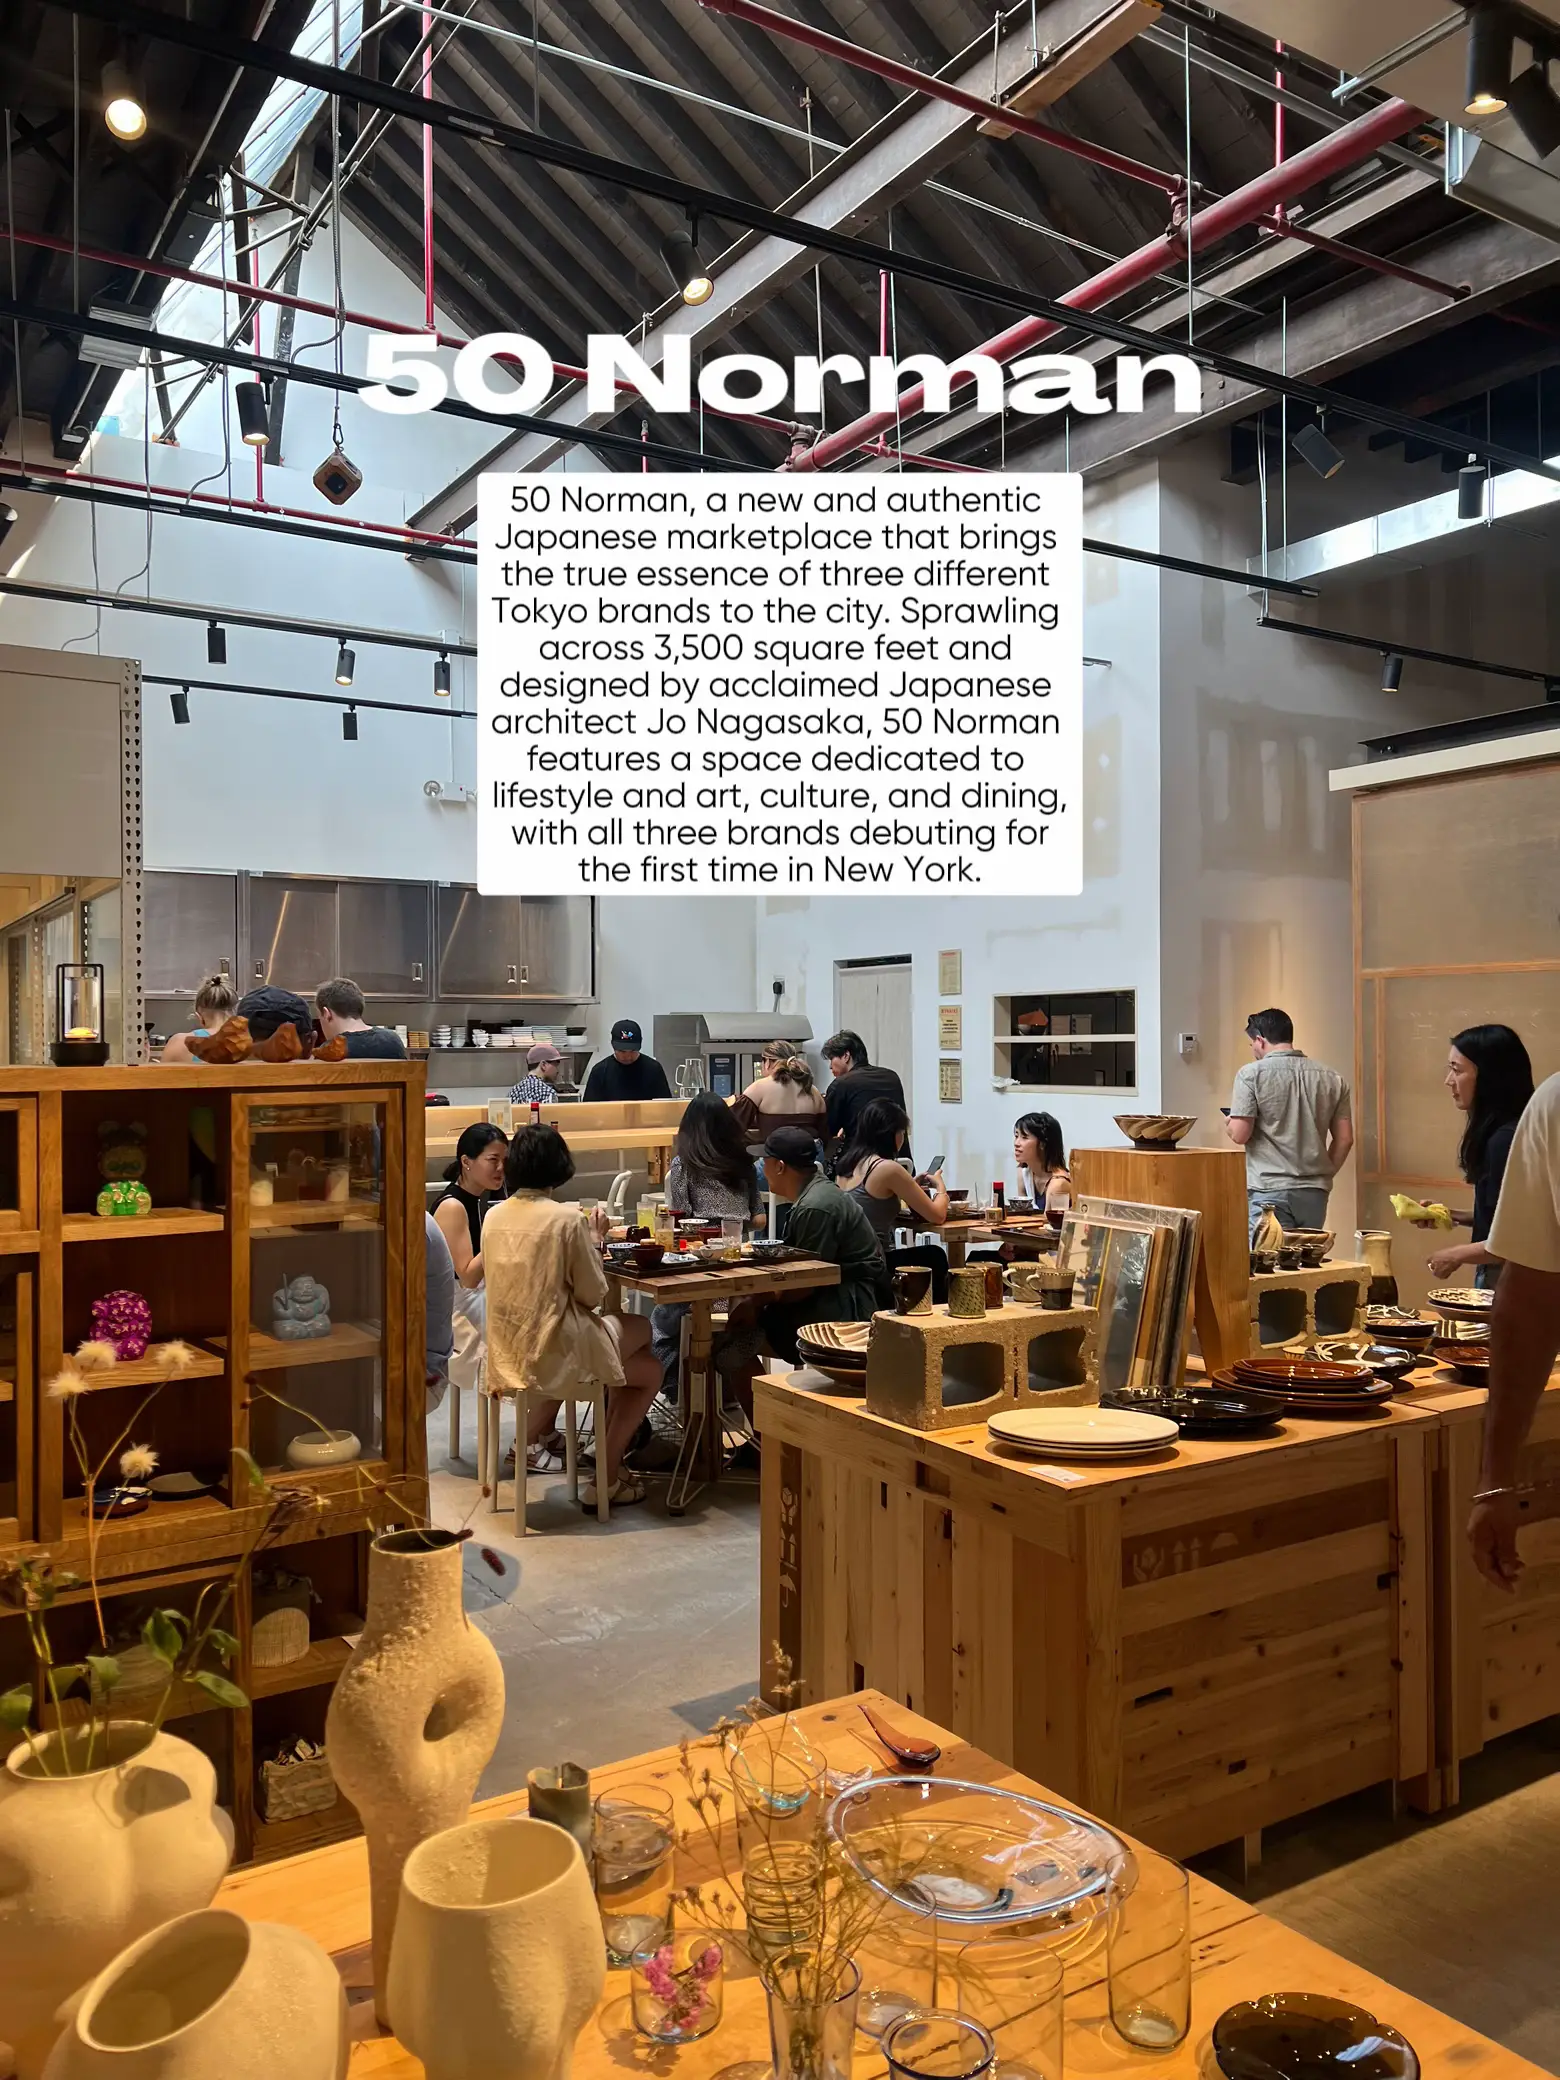 50 Norman - Japan crafts and food's images(1)